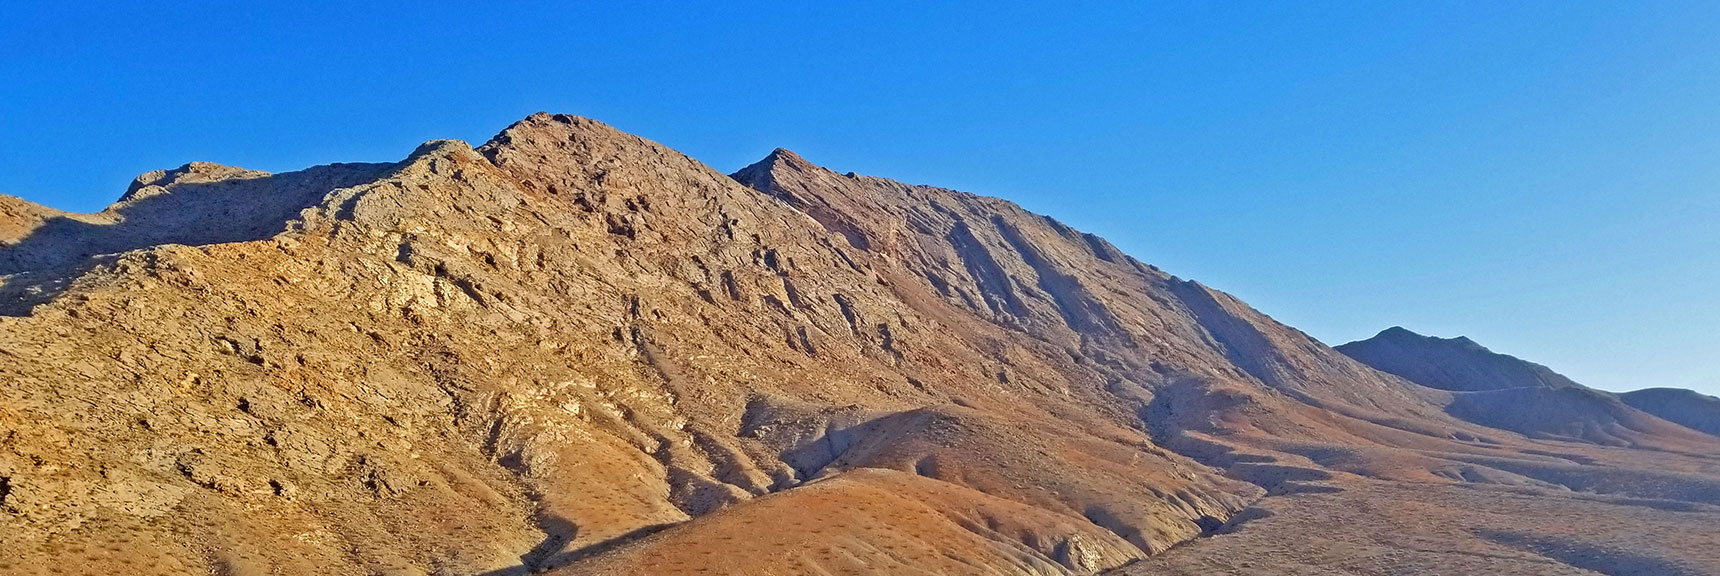 First Full View of Sunrise Mountain After Topping Initial Saddle on Route | Sunrise Mountain, Las Vegas, Nevada